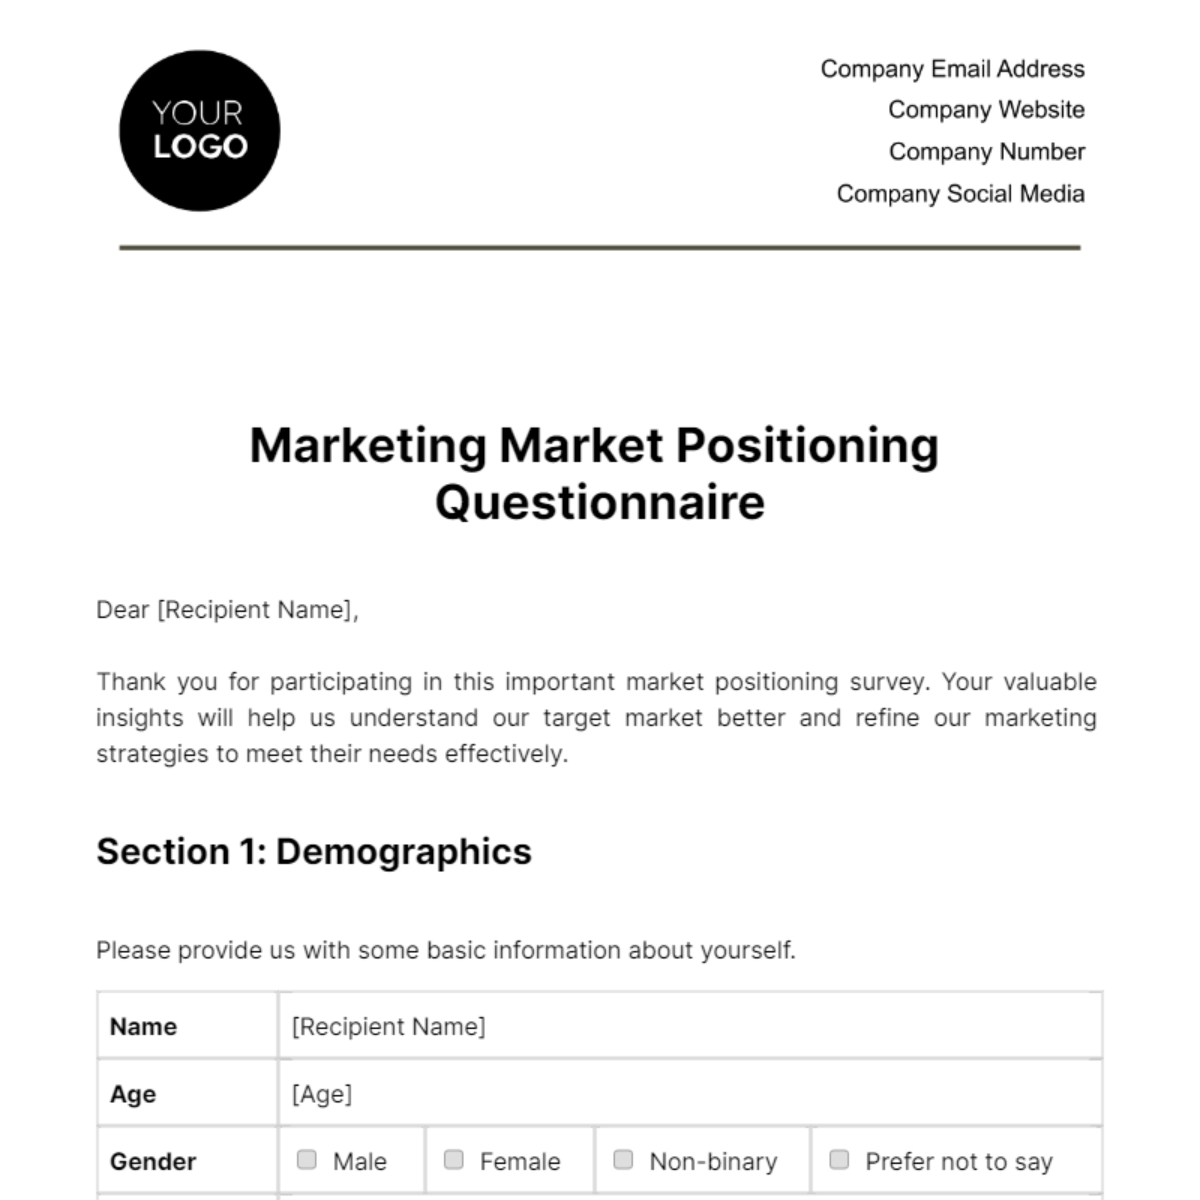 Marketing Market Positioning Questionnaire Template